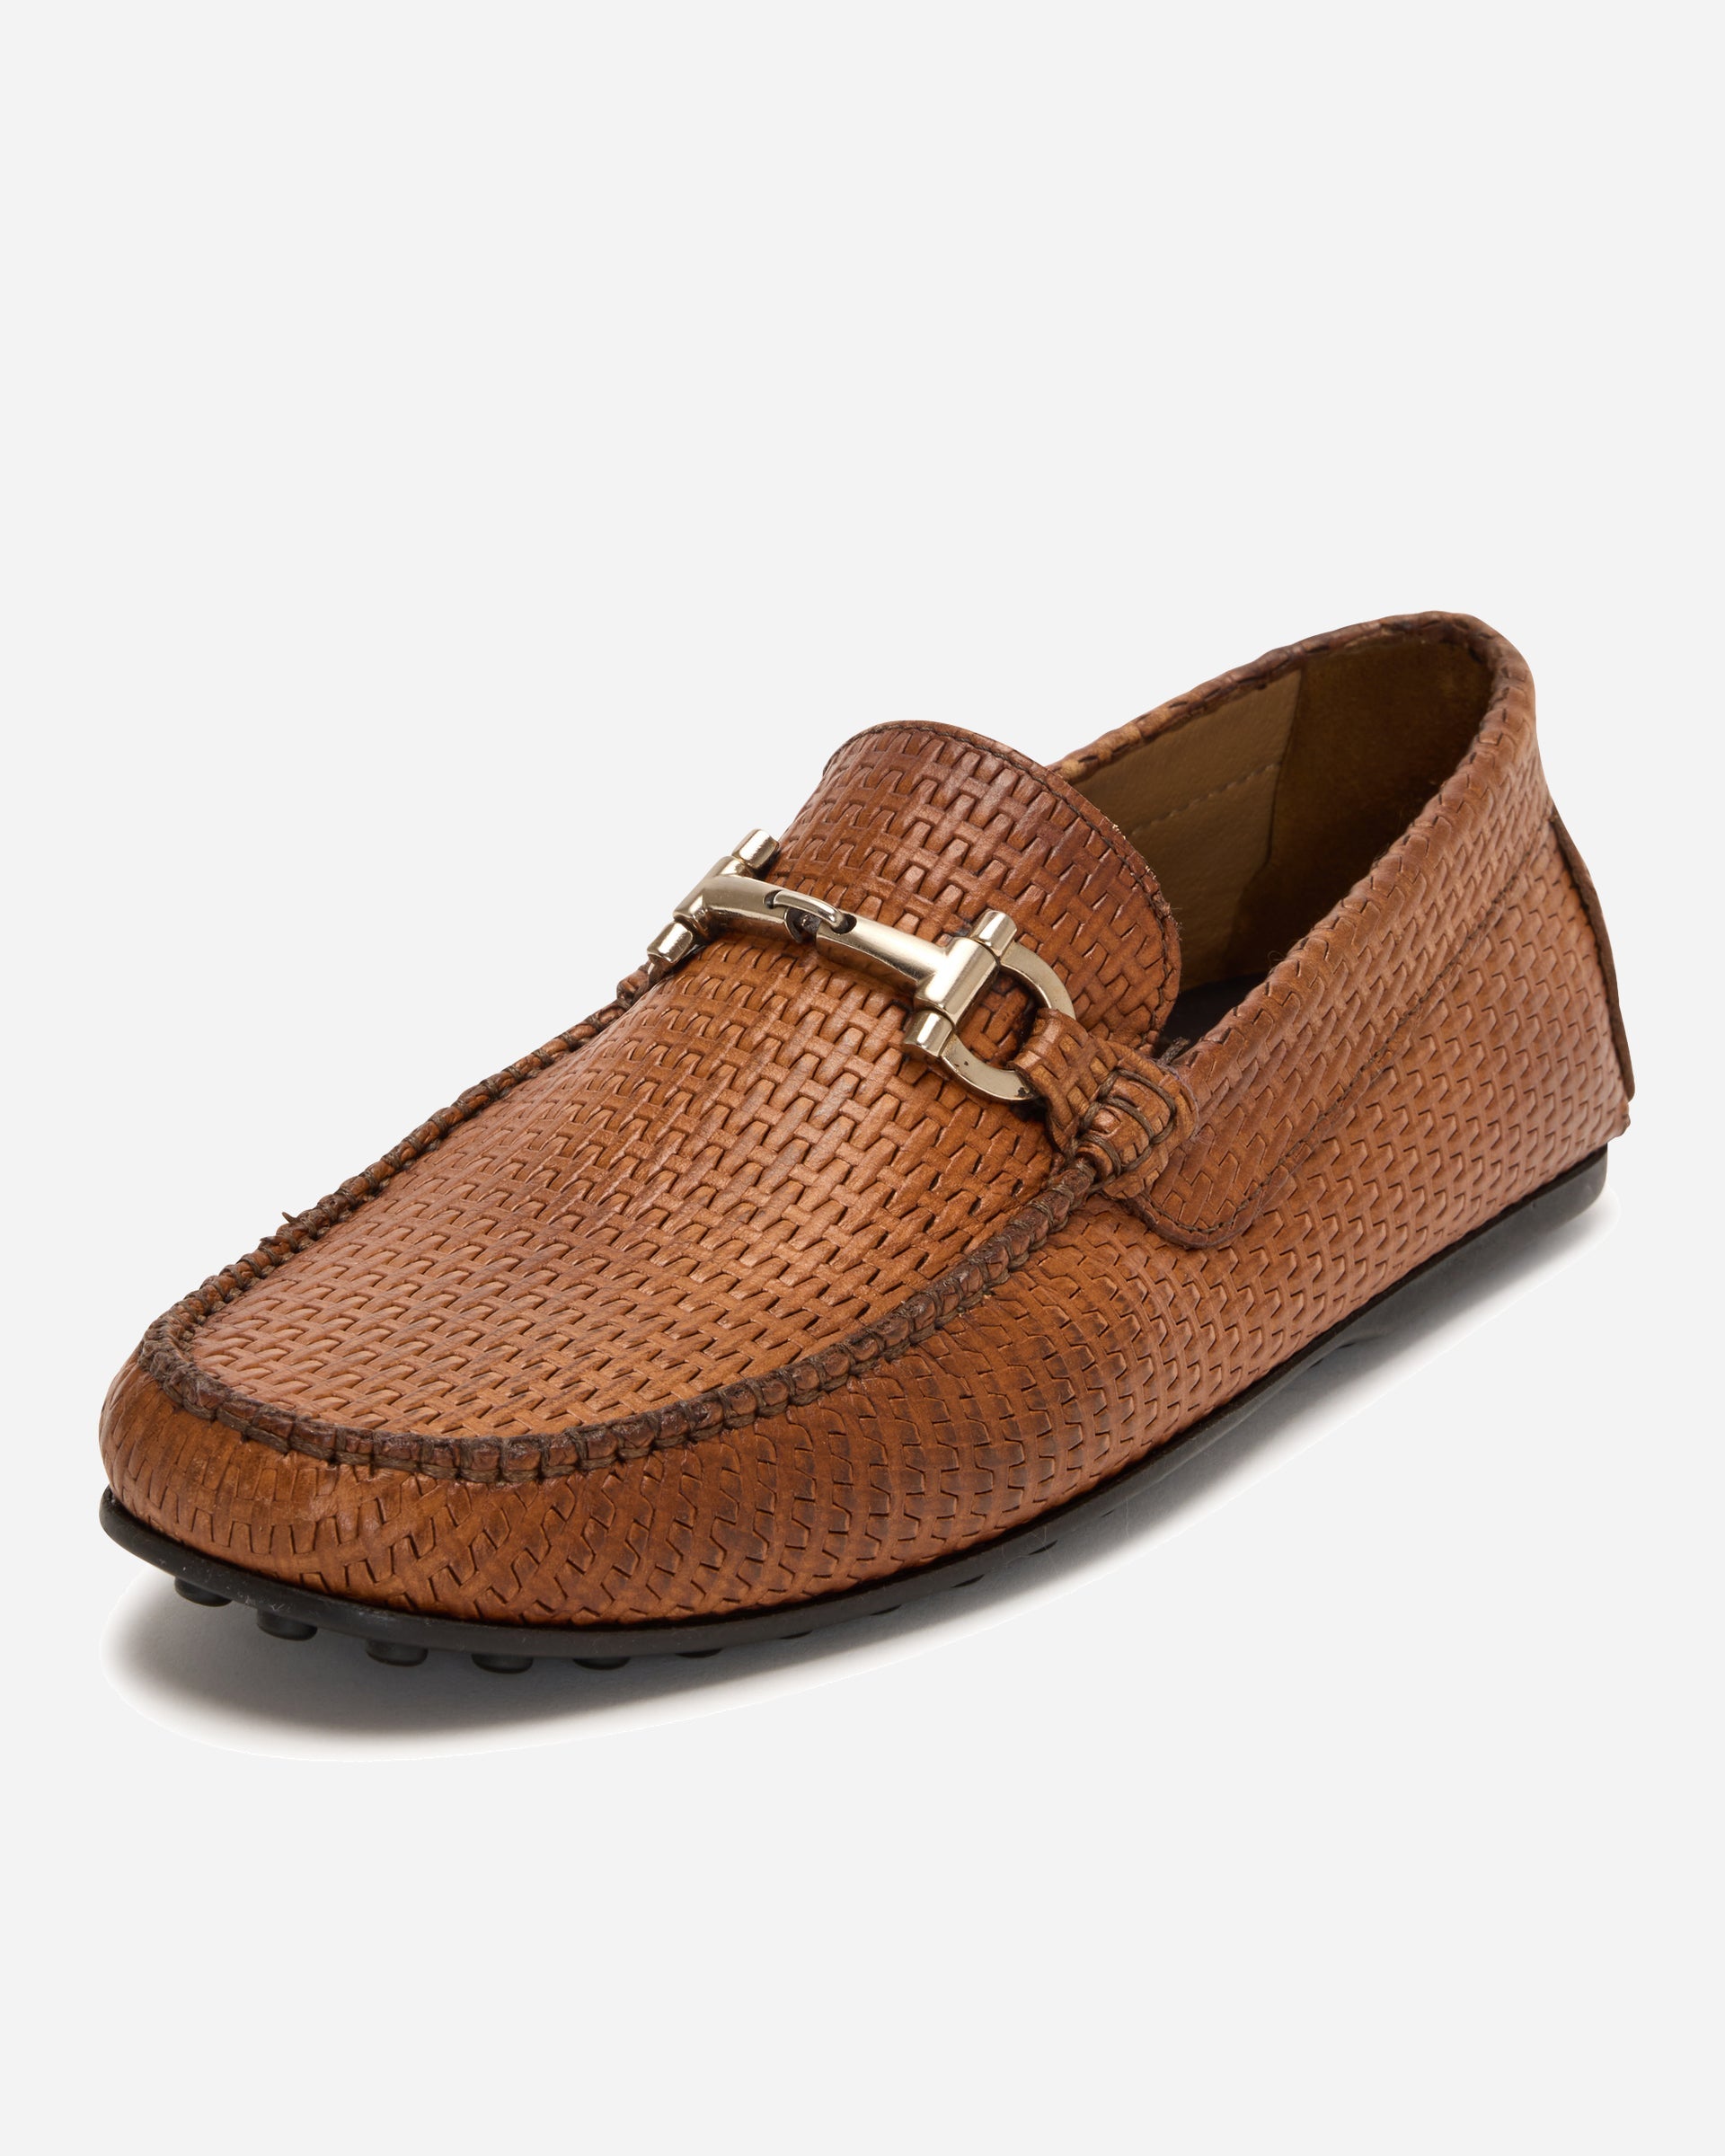 Acri Stampa Bit Loafer - Men's Loafers at Menzclub